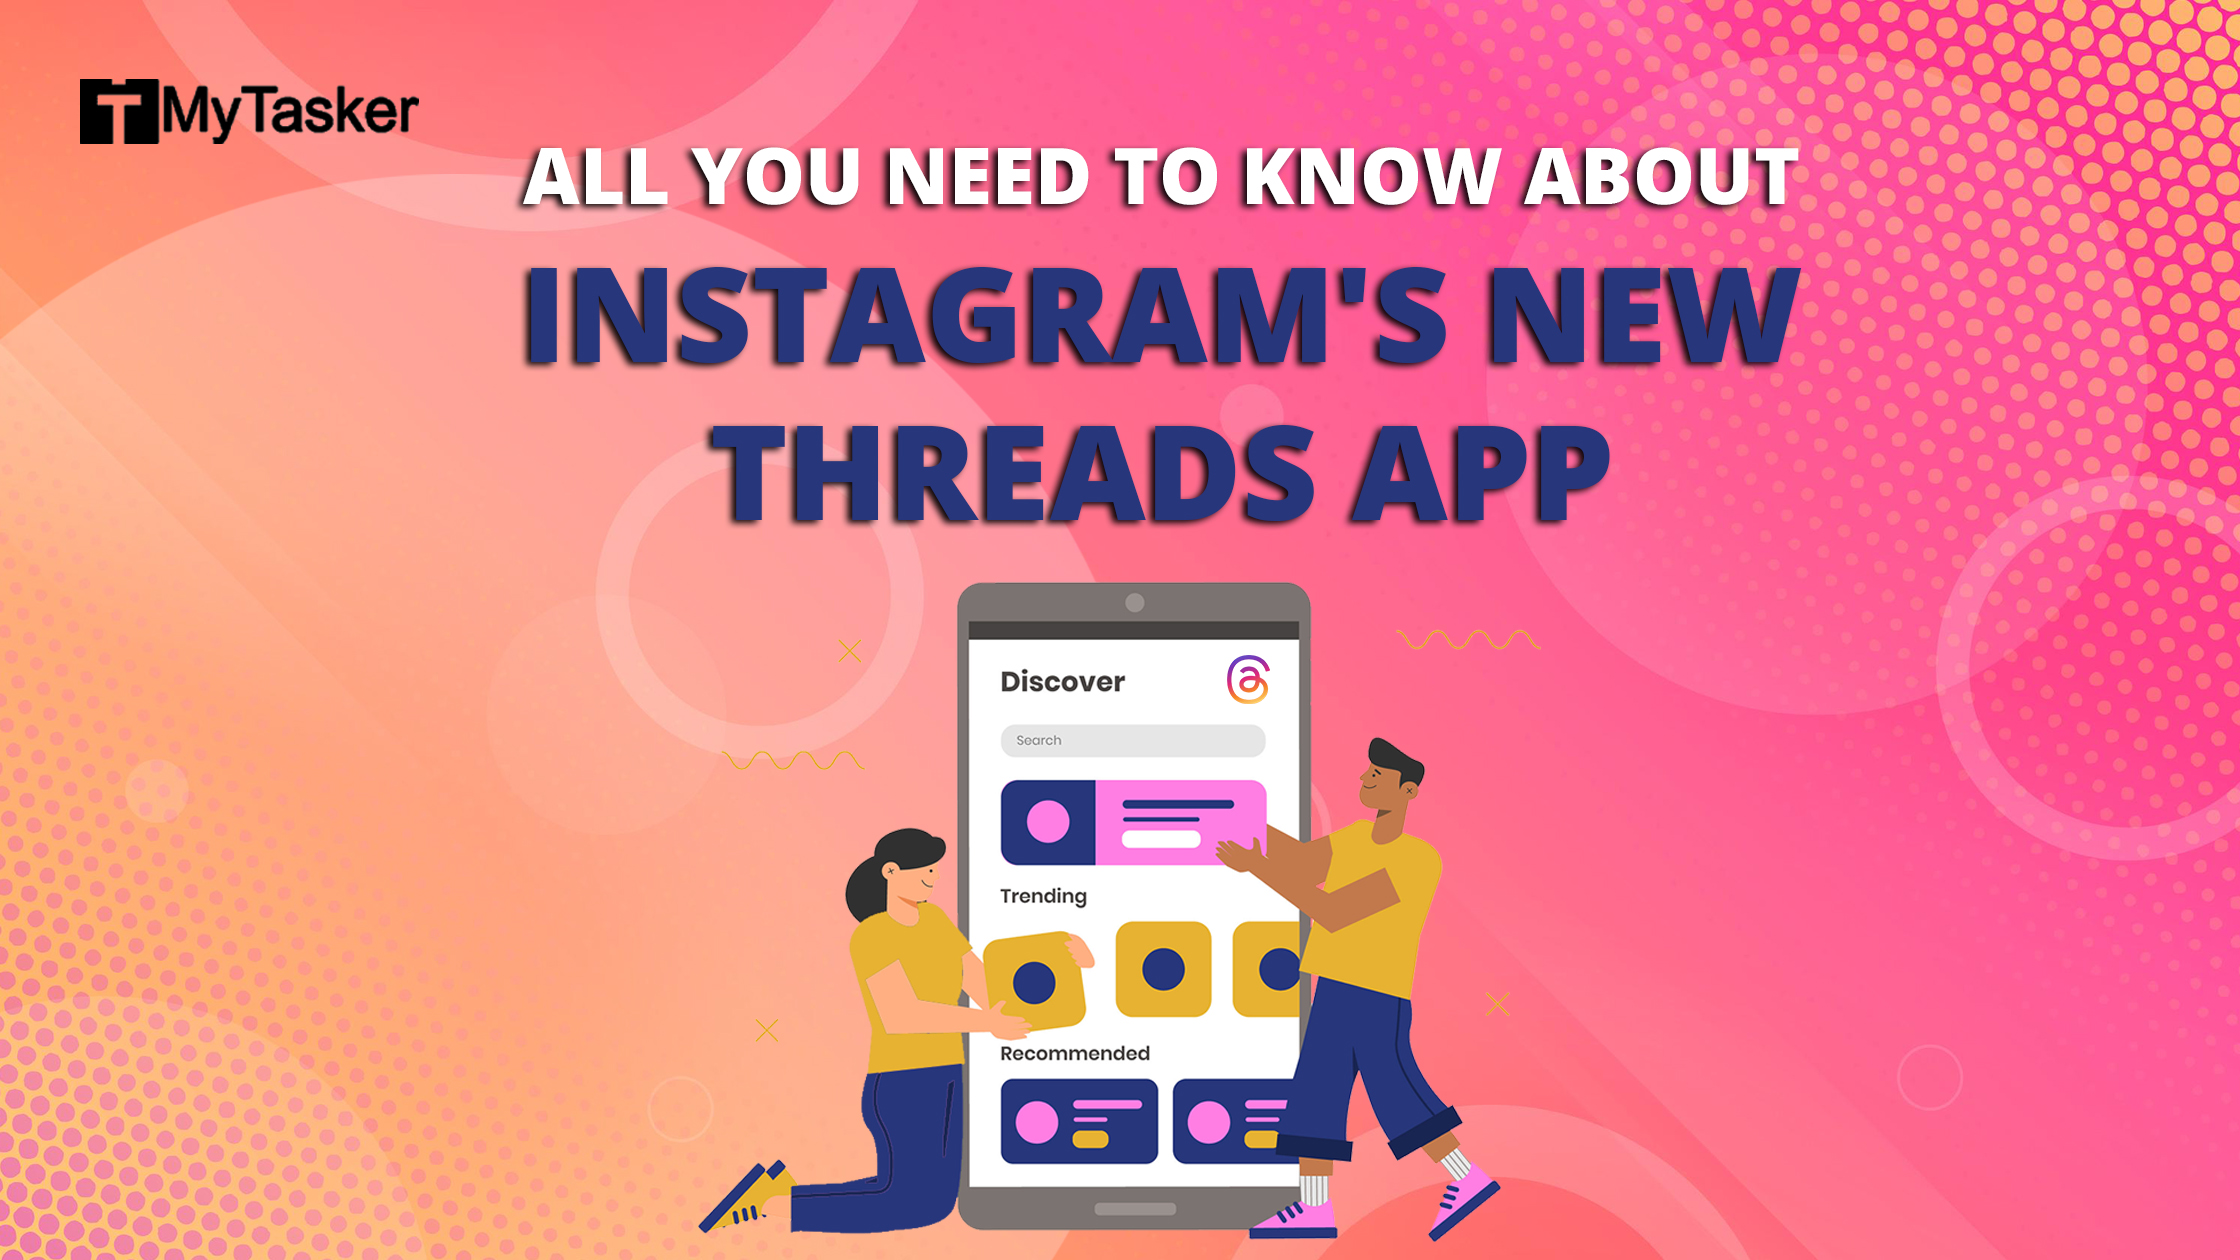 All You Need To Know About Instagram's New Threads App